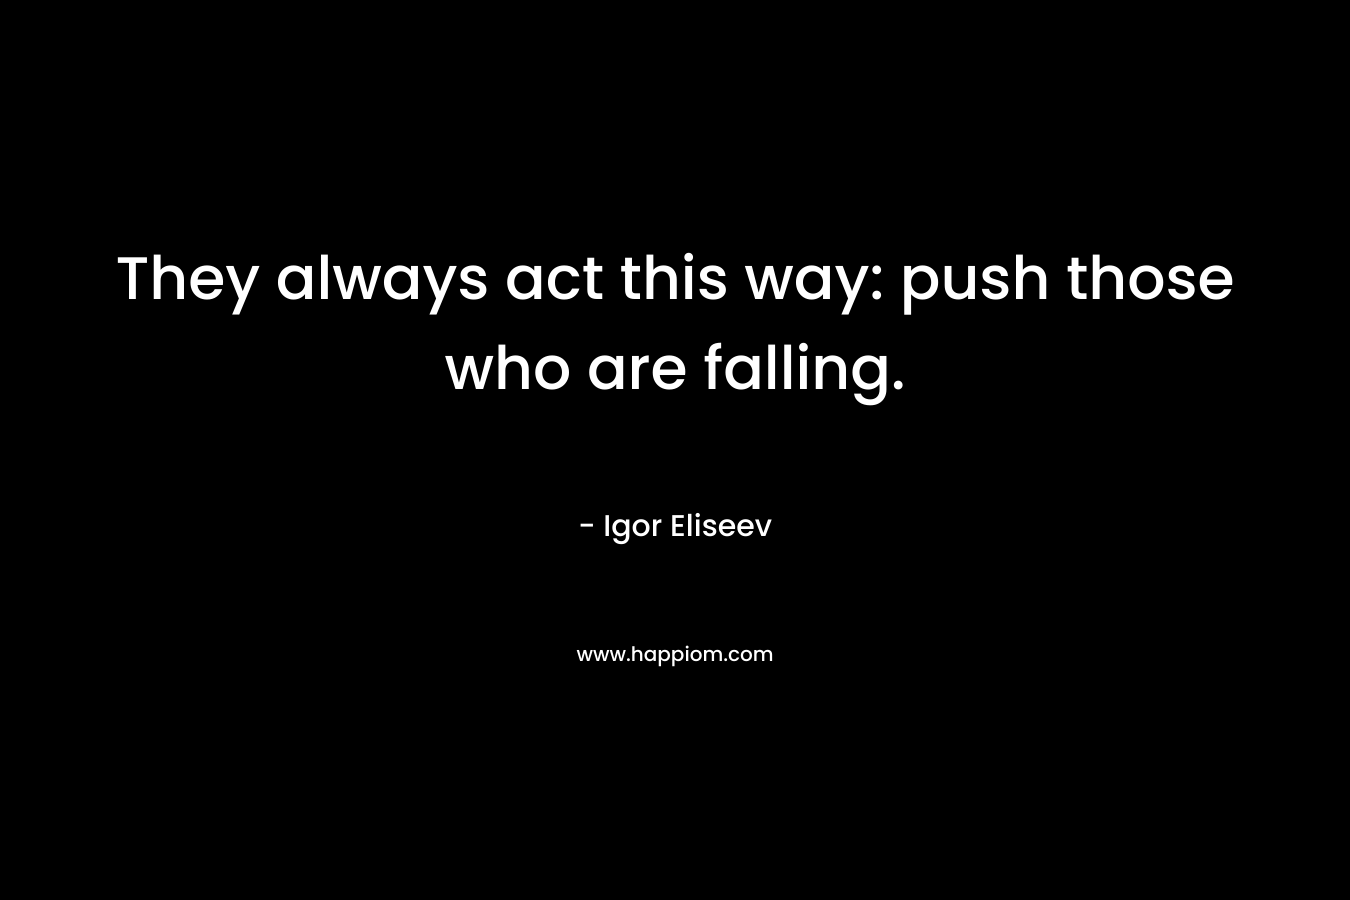 They always act this way: push those who are falling. – Igor Eliseev